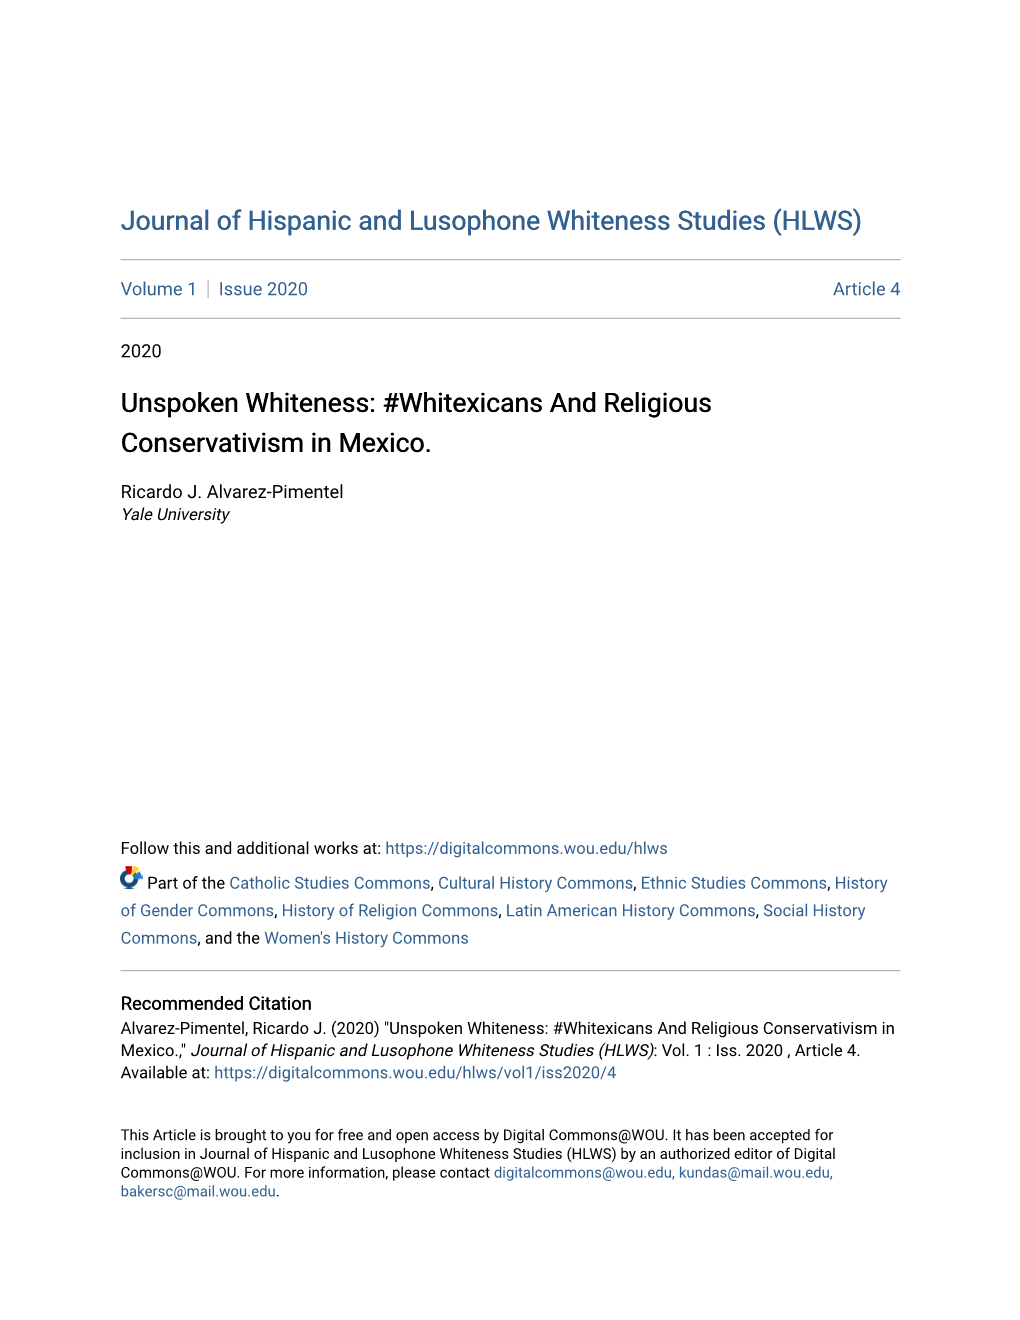 Unspoken Whiteness: #Whitexicans and Religious Conservativism in Mexico